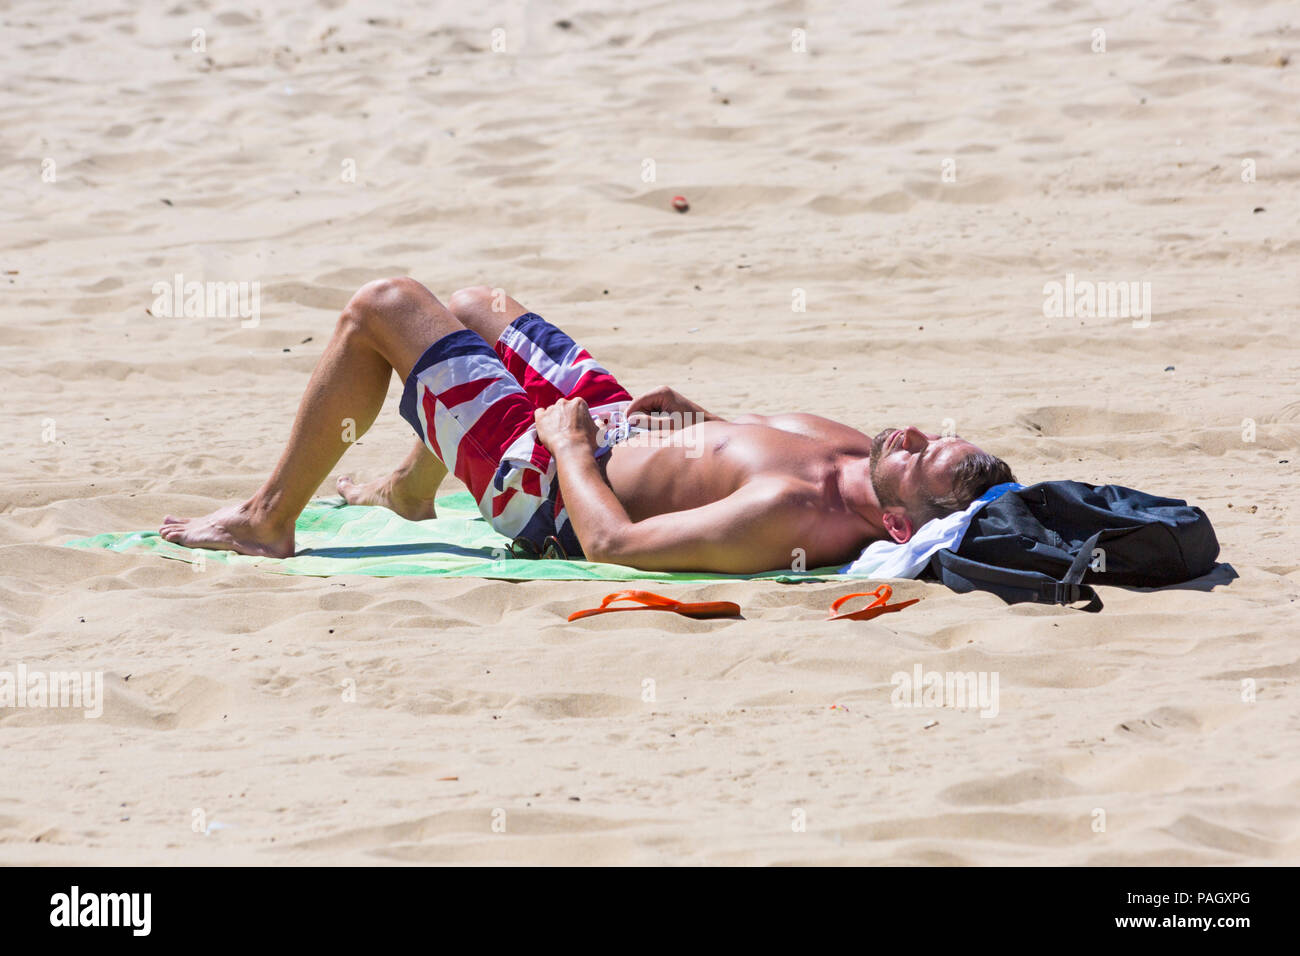 Bournemouth, Dorset, UK. 23rd July 2018. UK weather: the heatwave continues as temperatures rise on a scorching hot and sunny day at Bournemouth beaches with blue skies and unbroken sunshine. Sunseekers head to the seaside to soak up the sun. Man wearing Union Jack shorts sunbathing on beach. Credit: Carolyn Jenkins/Alamy Live News Stock Photo